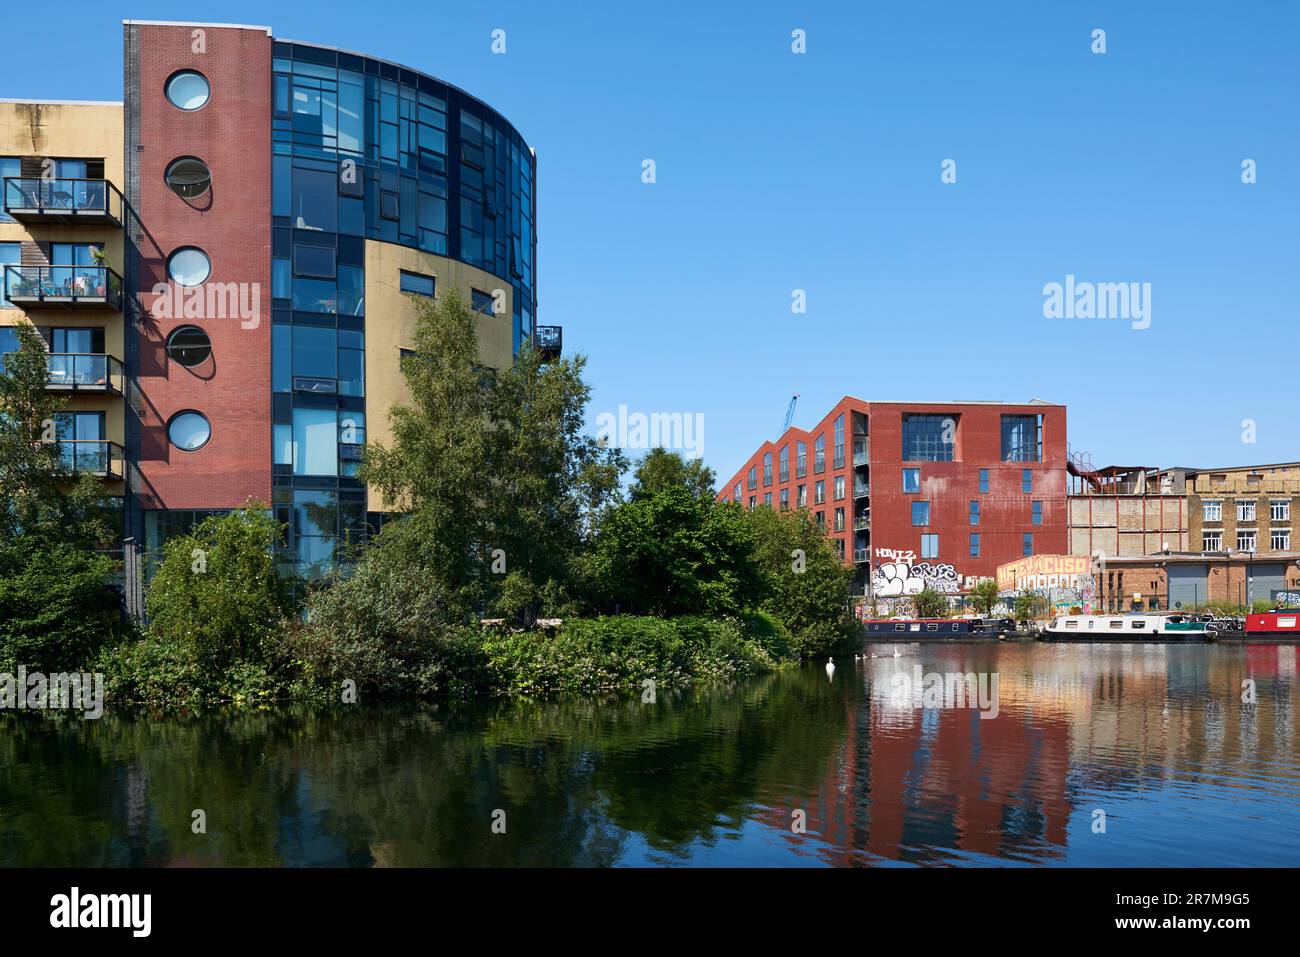 Apartments on the River Lea Navigation a Hackney Wick, East London UK, all'inizio dell'estate. Foto Stock